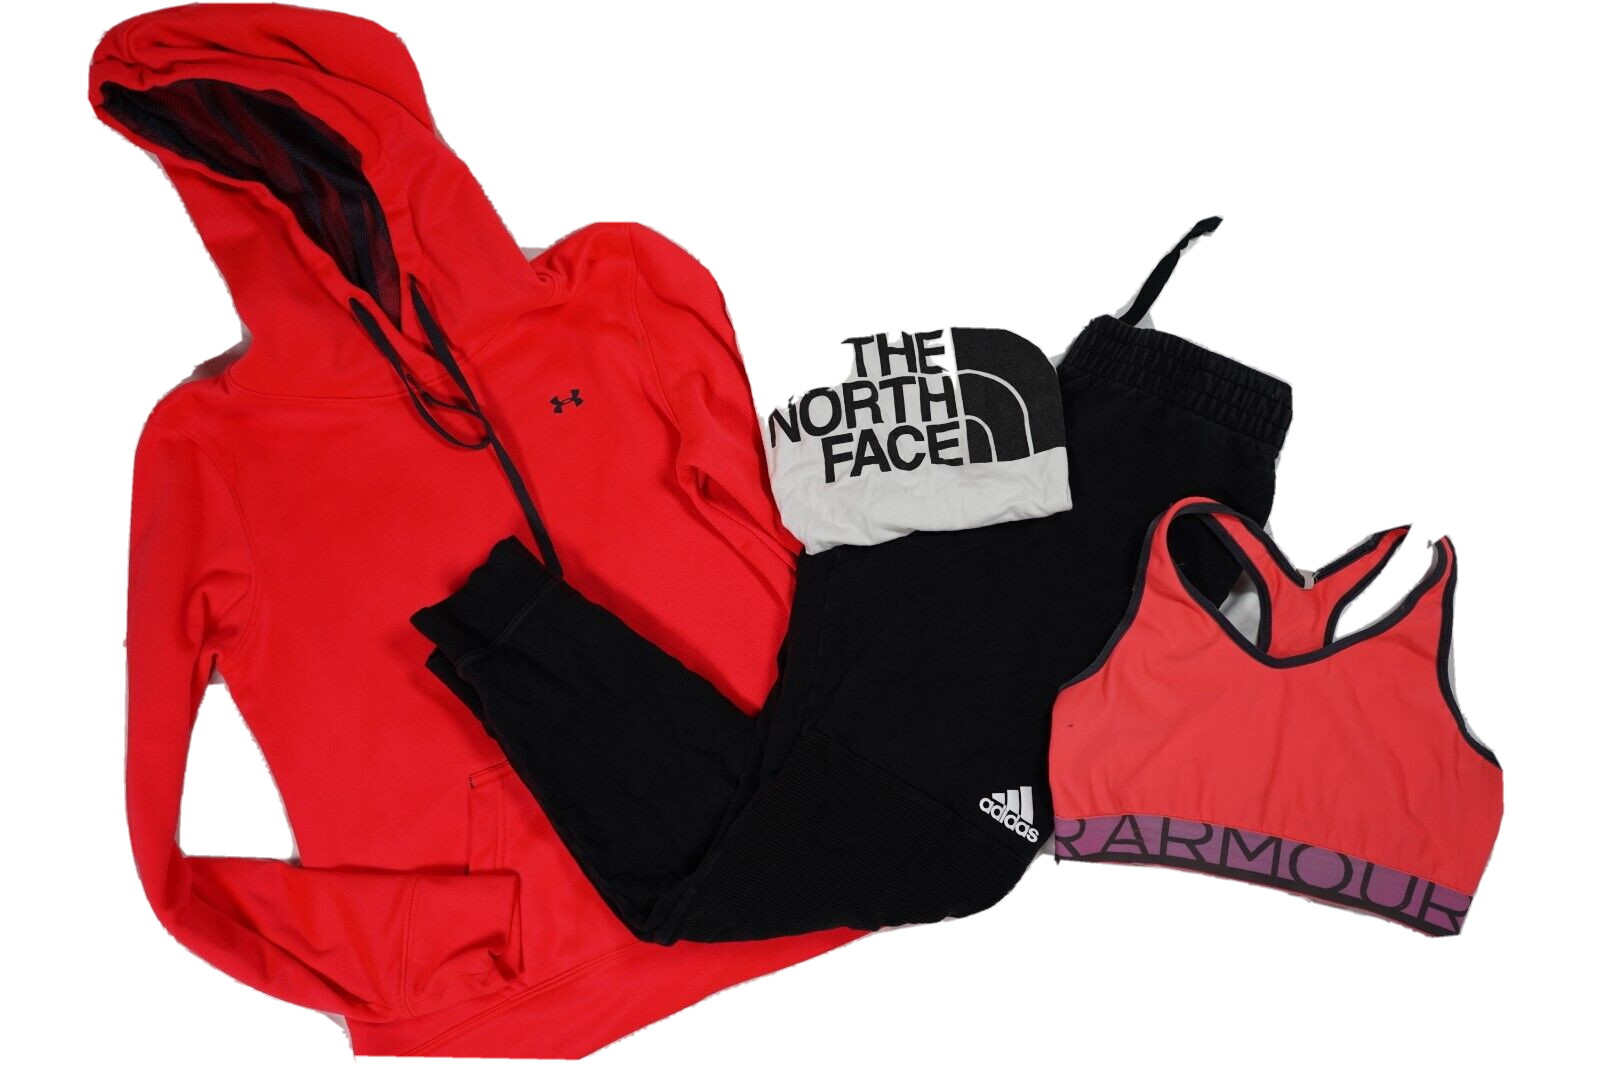 Women's Clothing Lot (4) ADIDAS, NORTH FACE & UNDER ARMOUR Hoodie & More Sz M Nike Does Not Apply